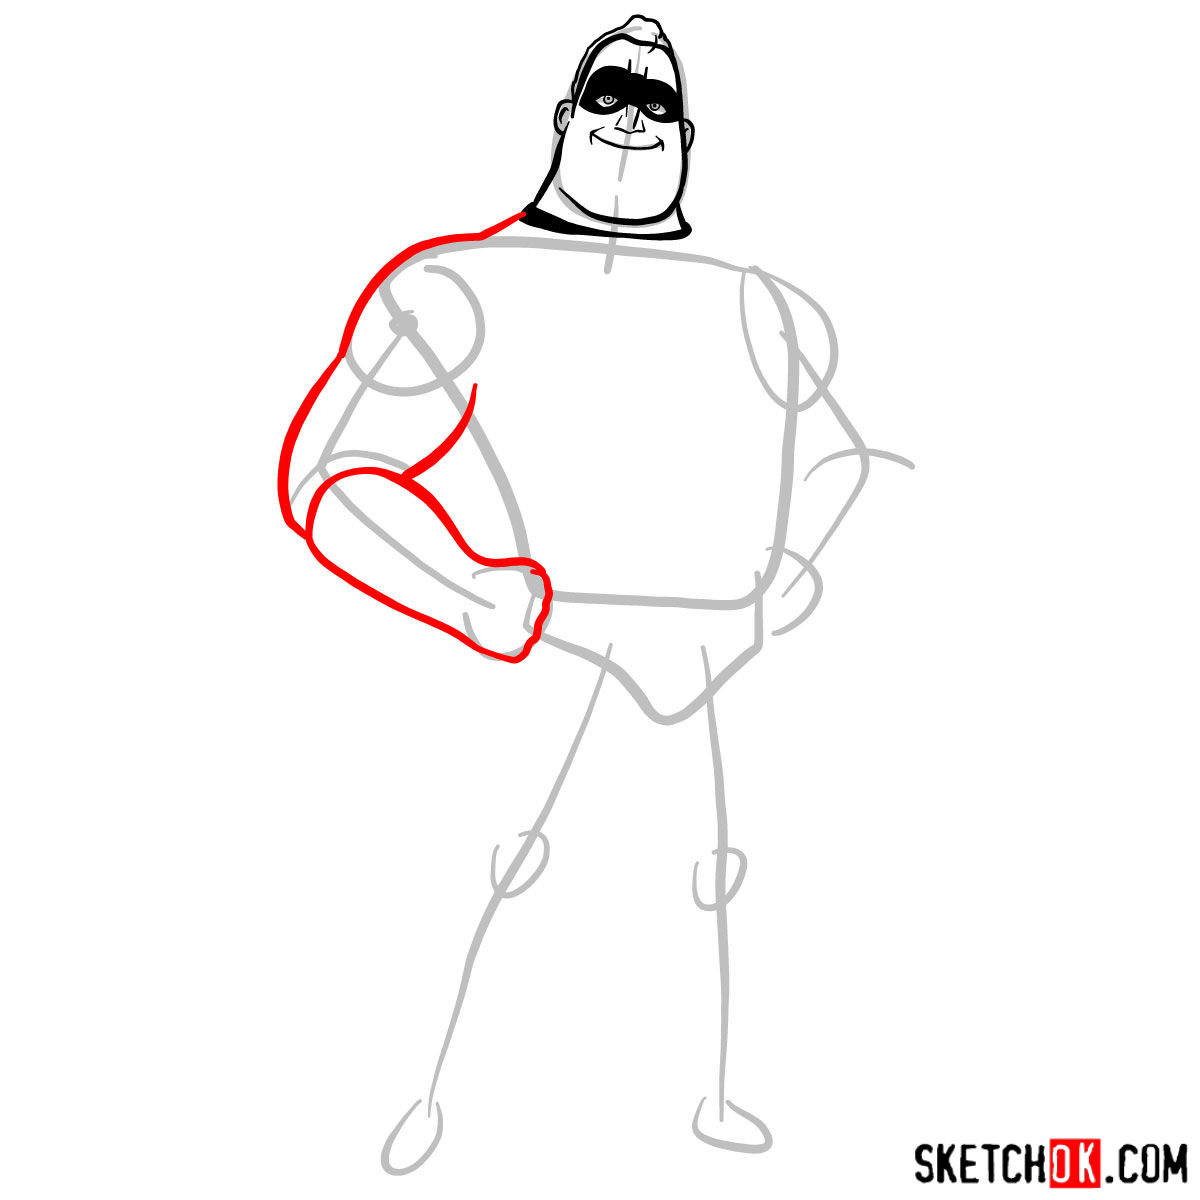 Pin on How to draw everything - SketchOK.com